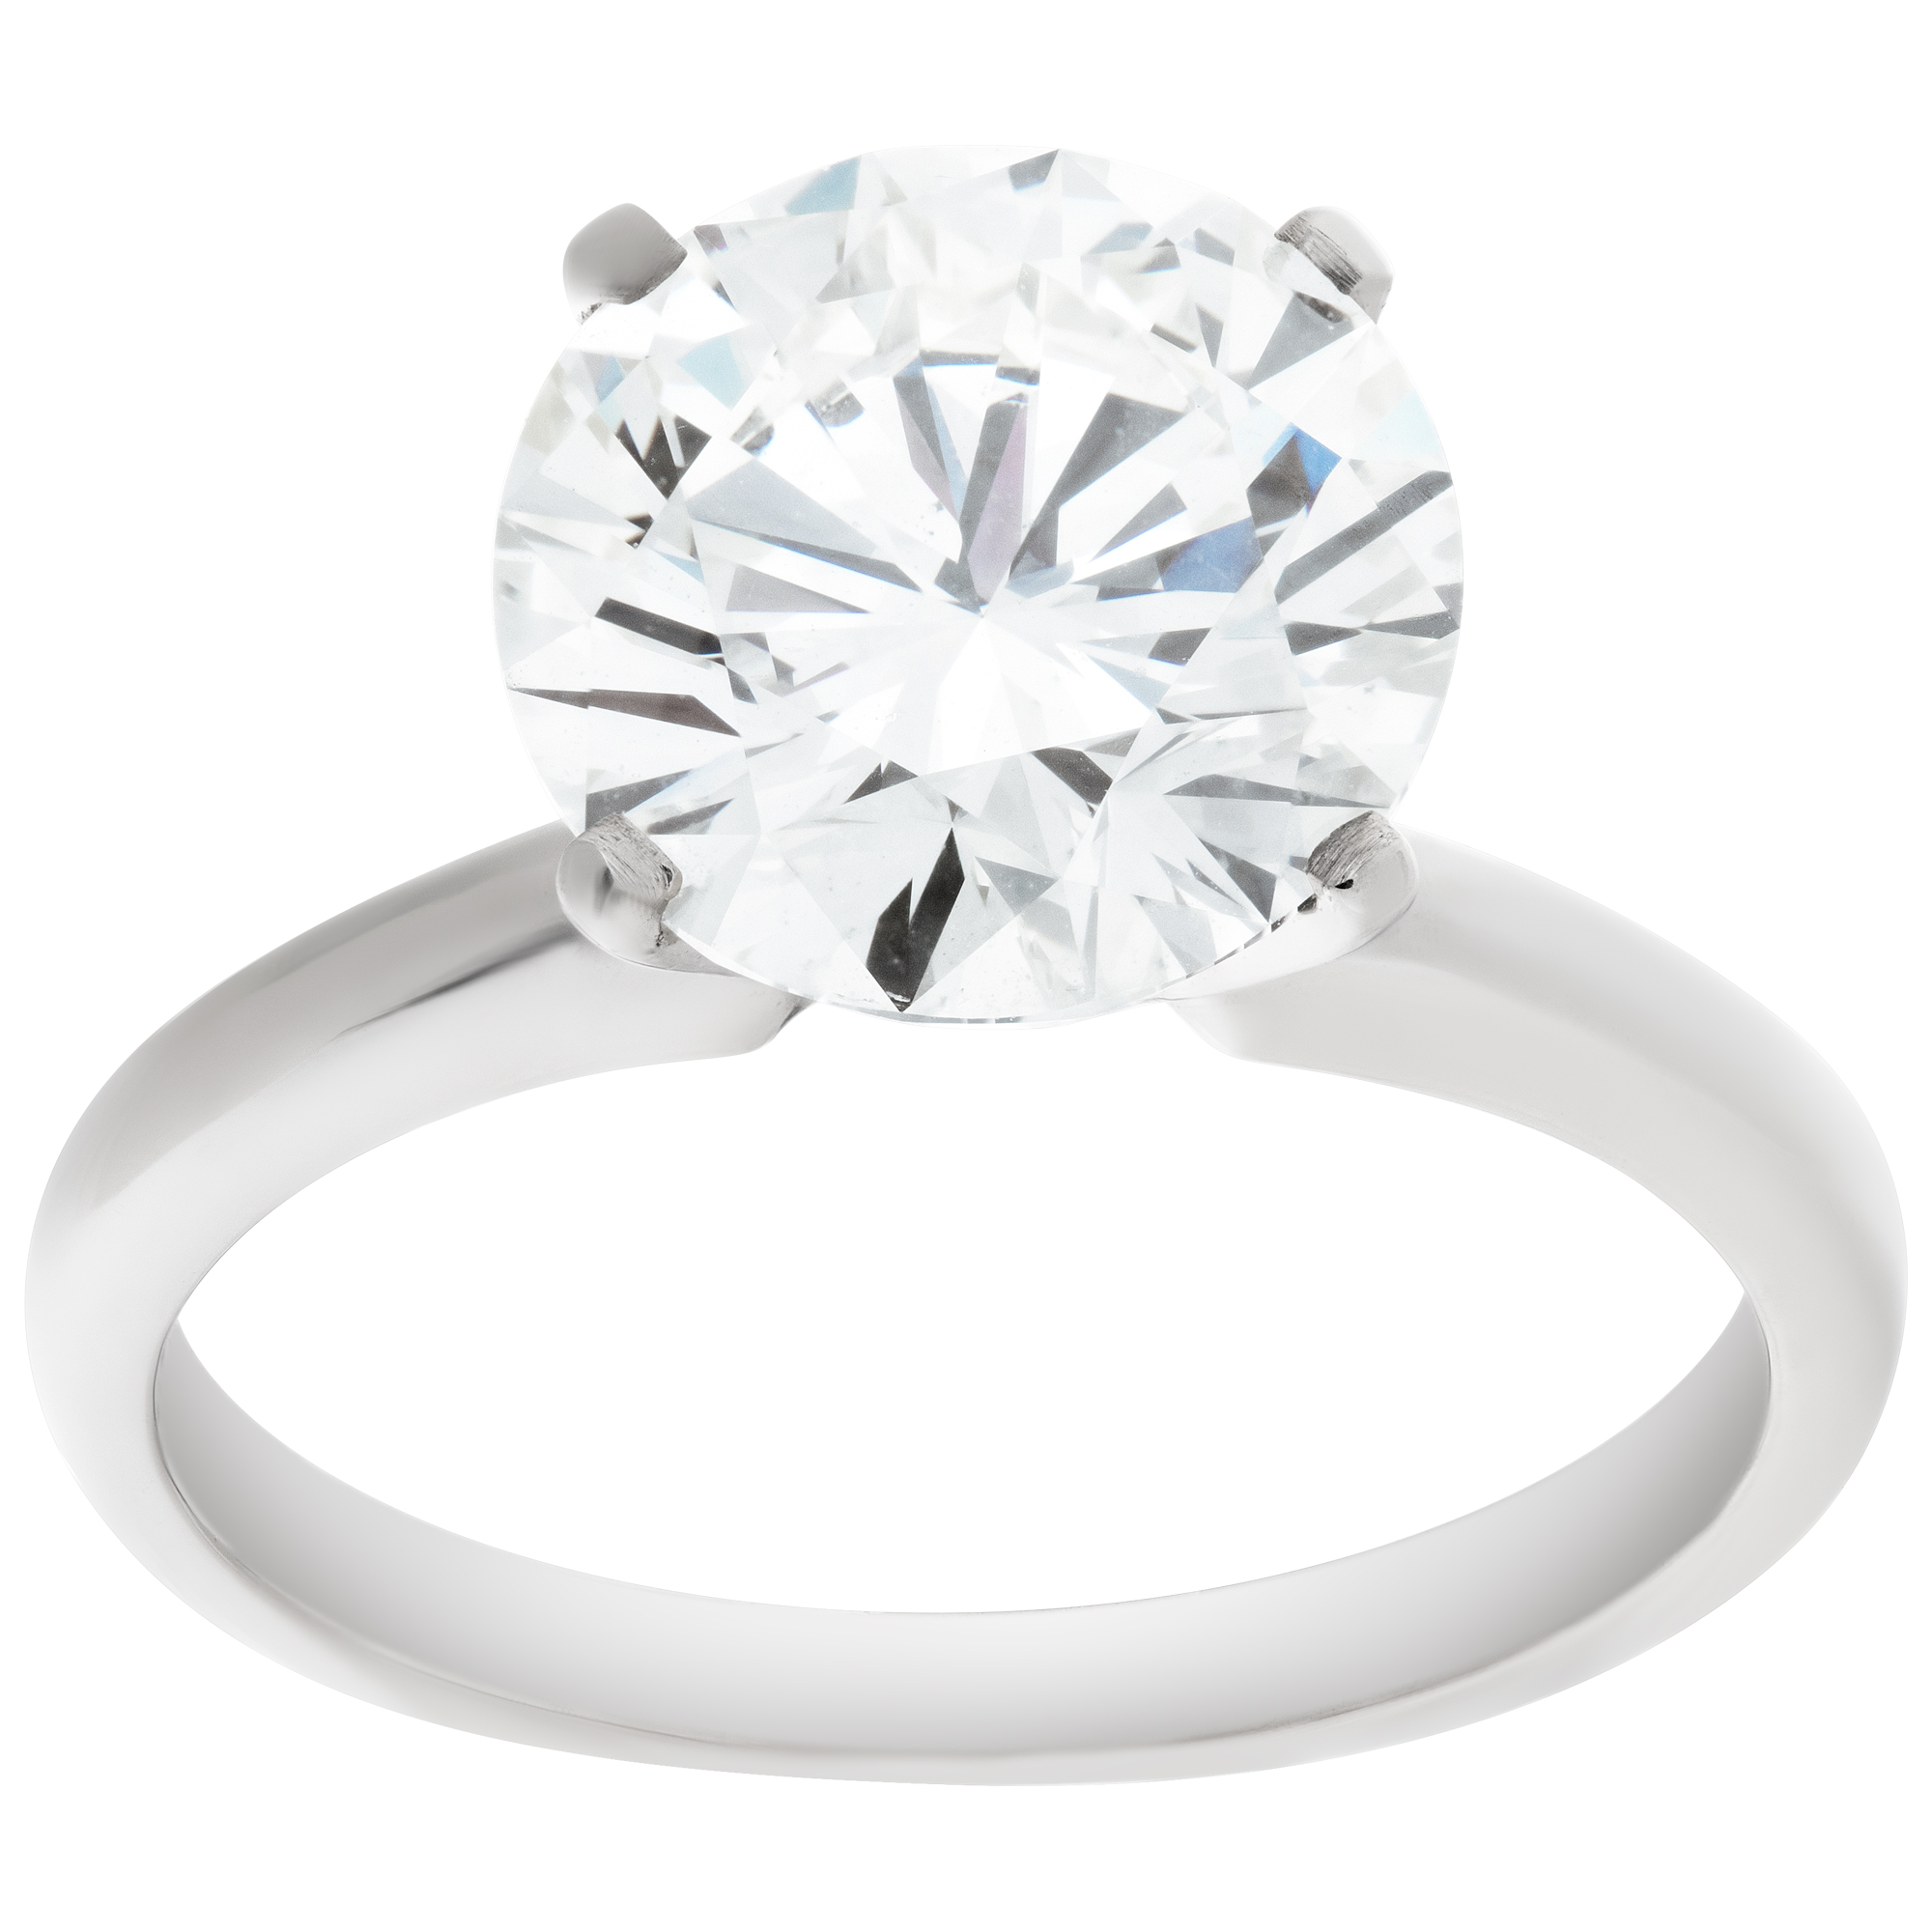 GIA certified round brilliant cut diamond 3.02 carat (L color, Internally Flawless clarity) solitair image 1